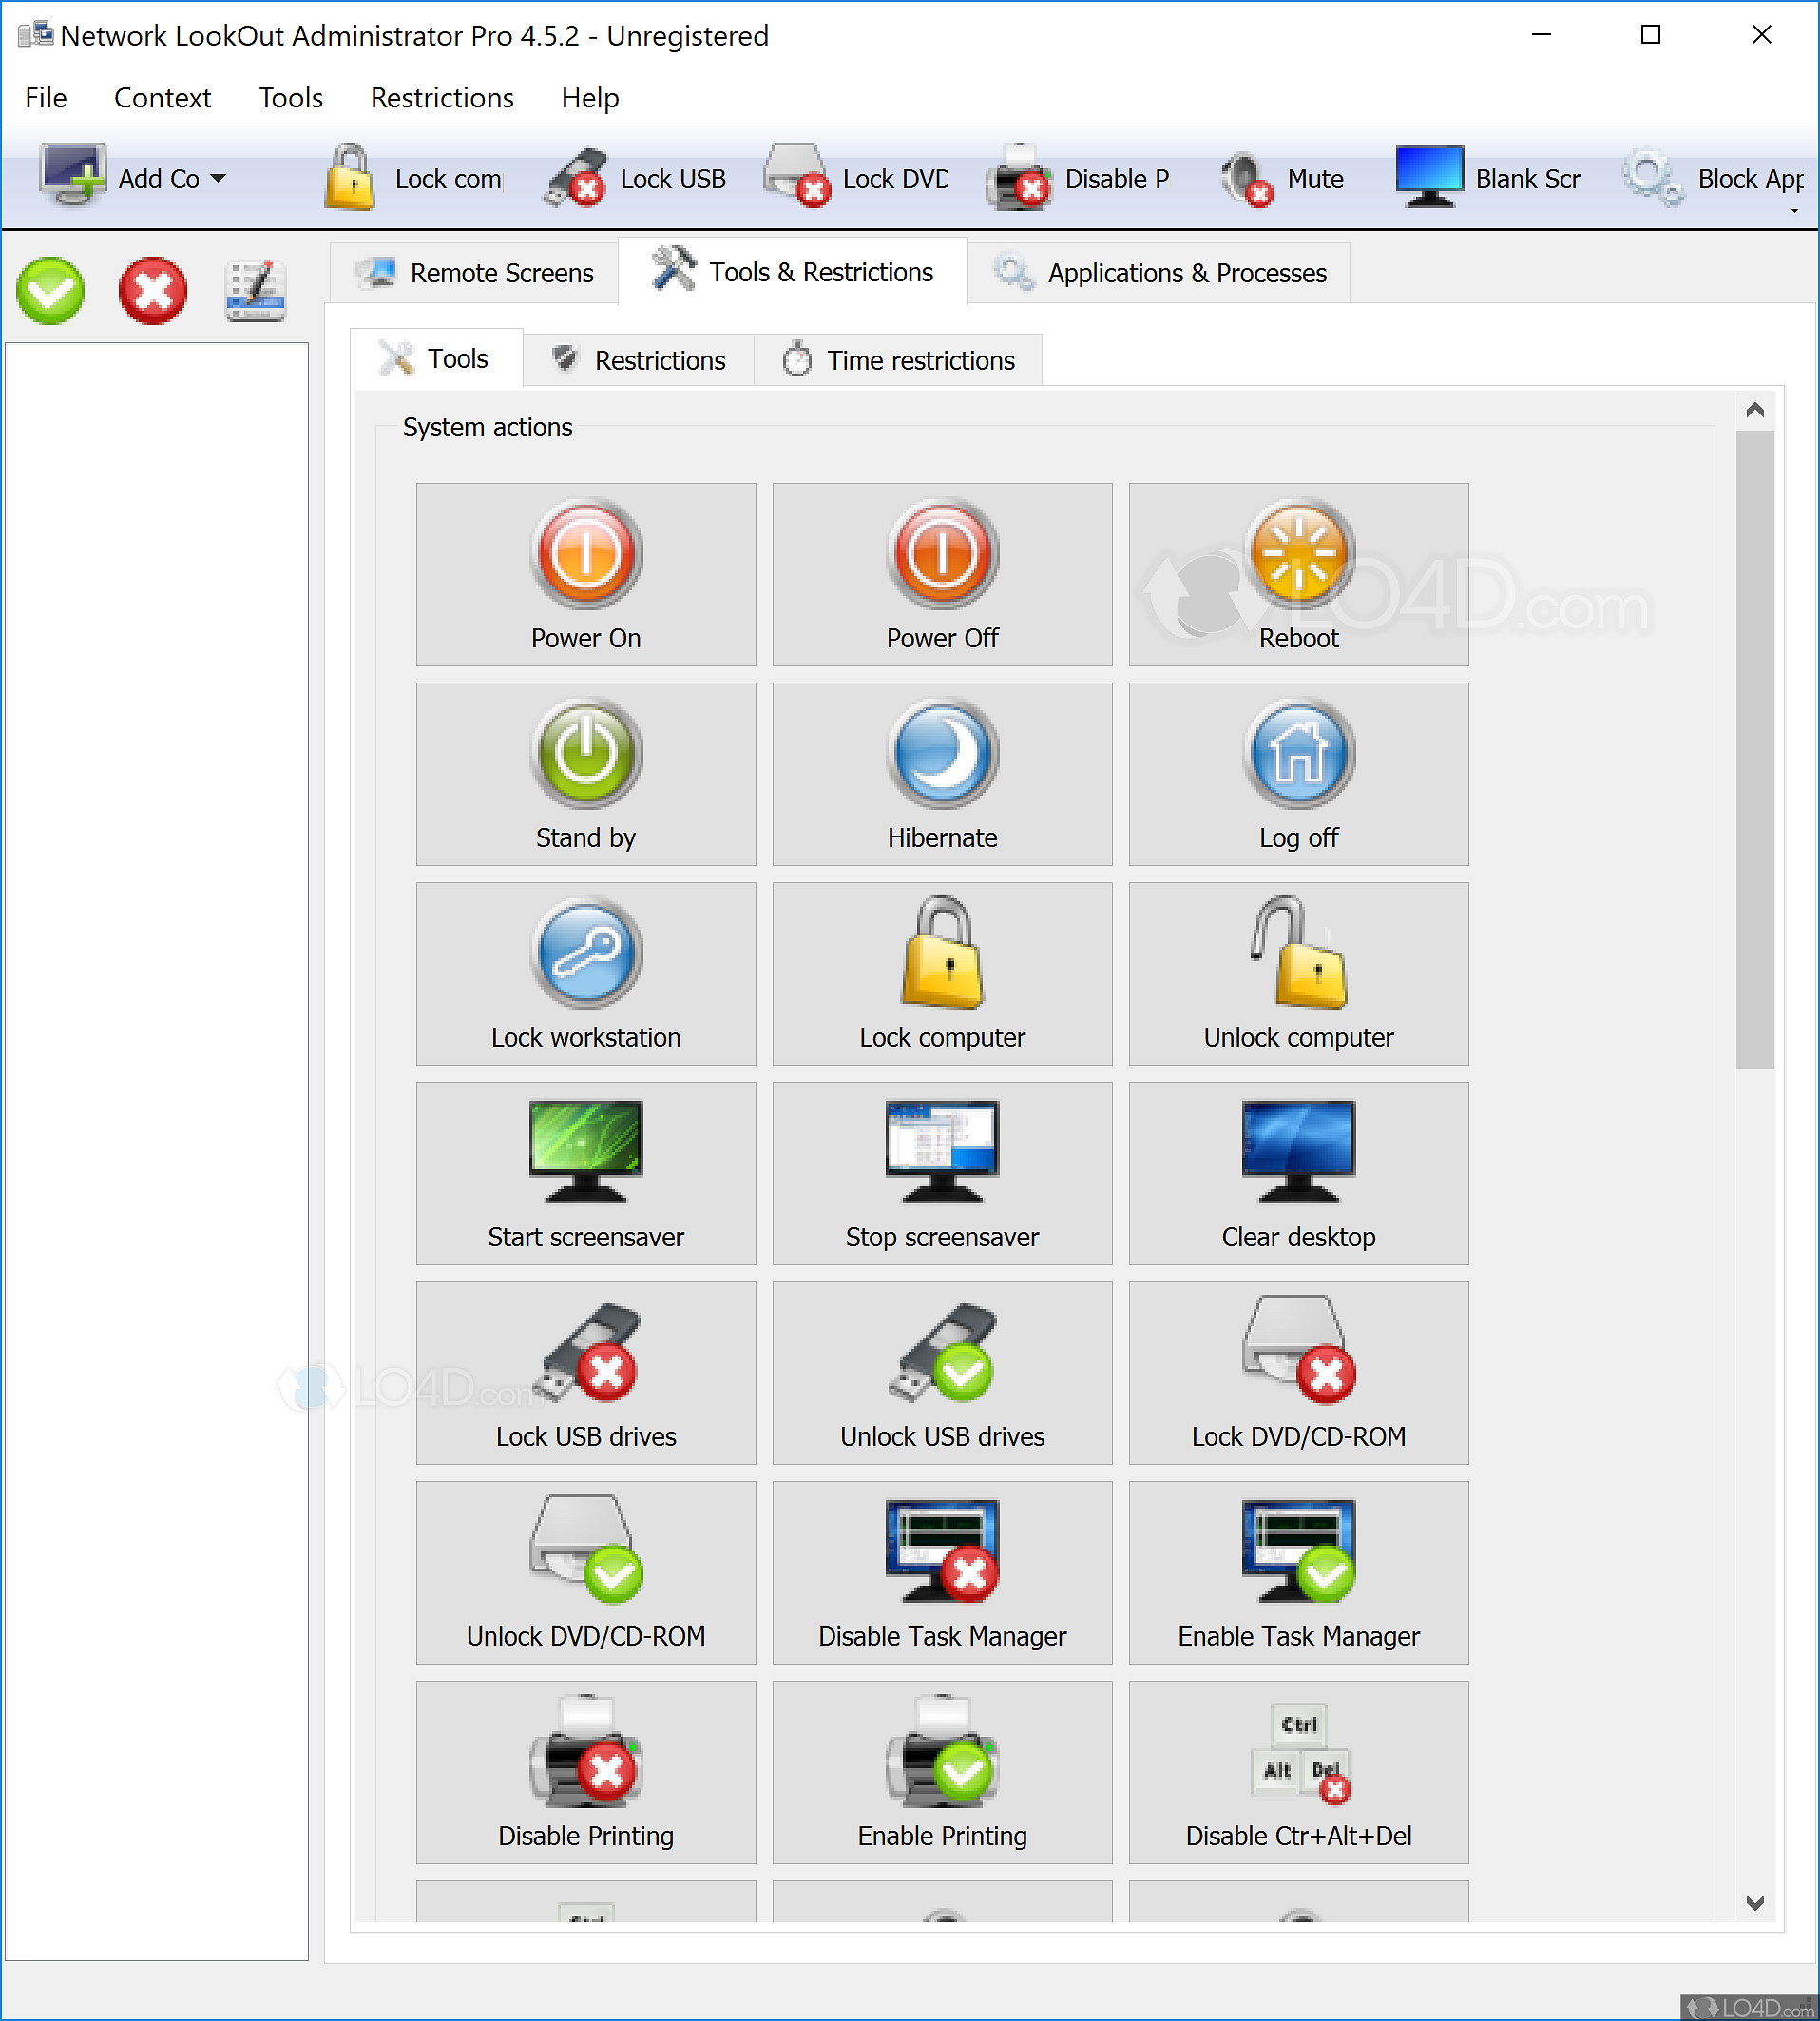 download Network LookOut Administrator Professional 5.1.2 free